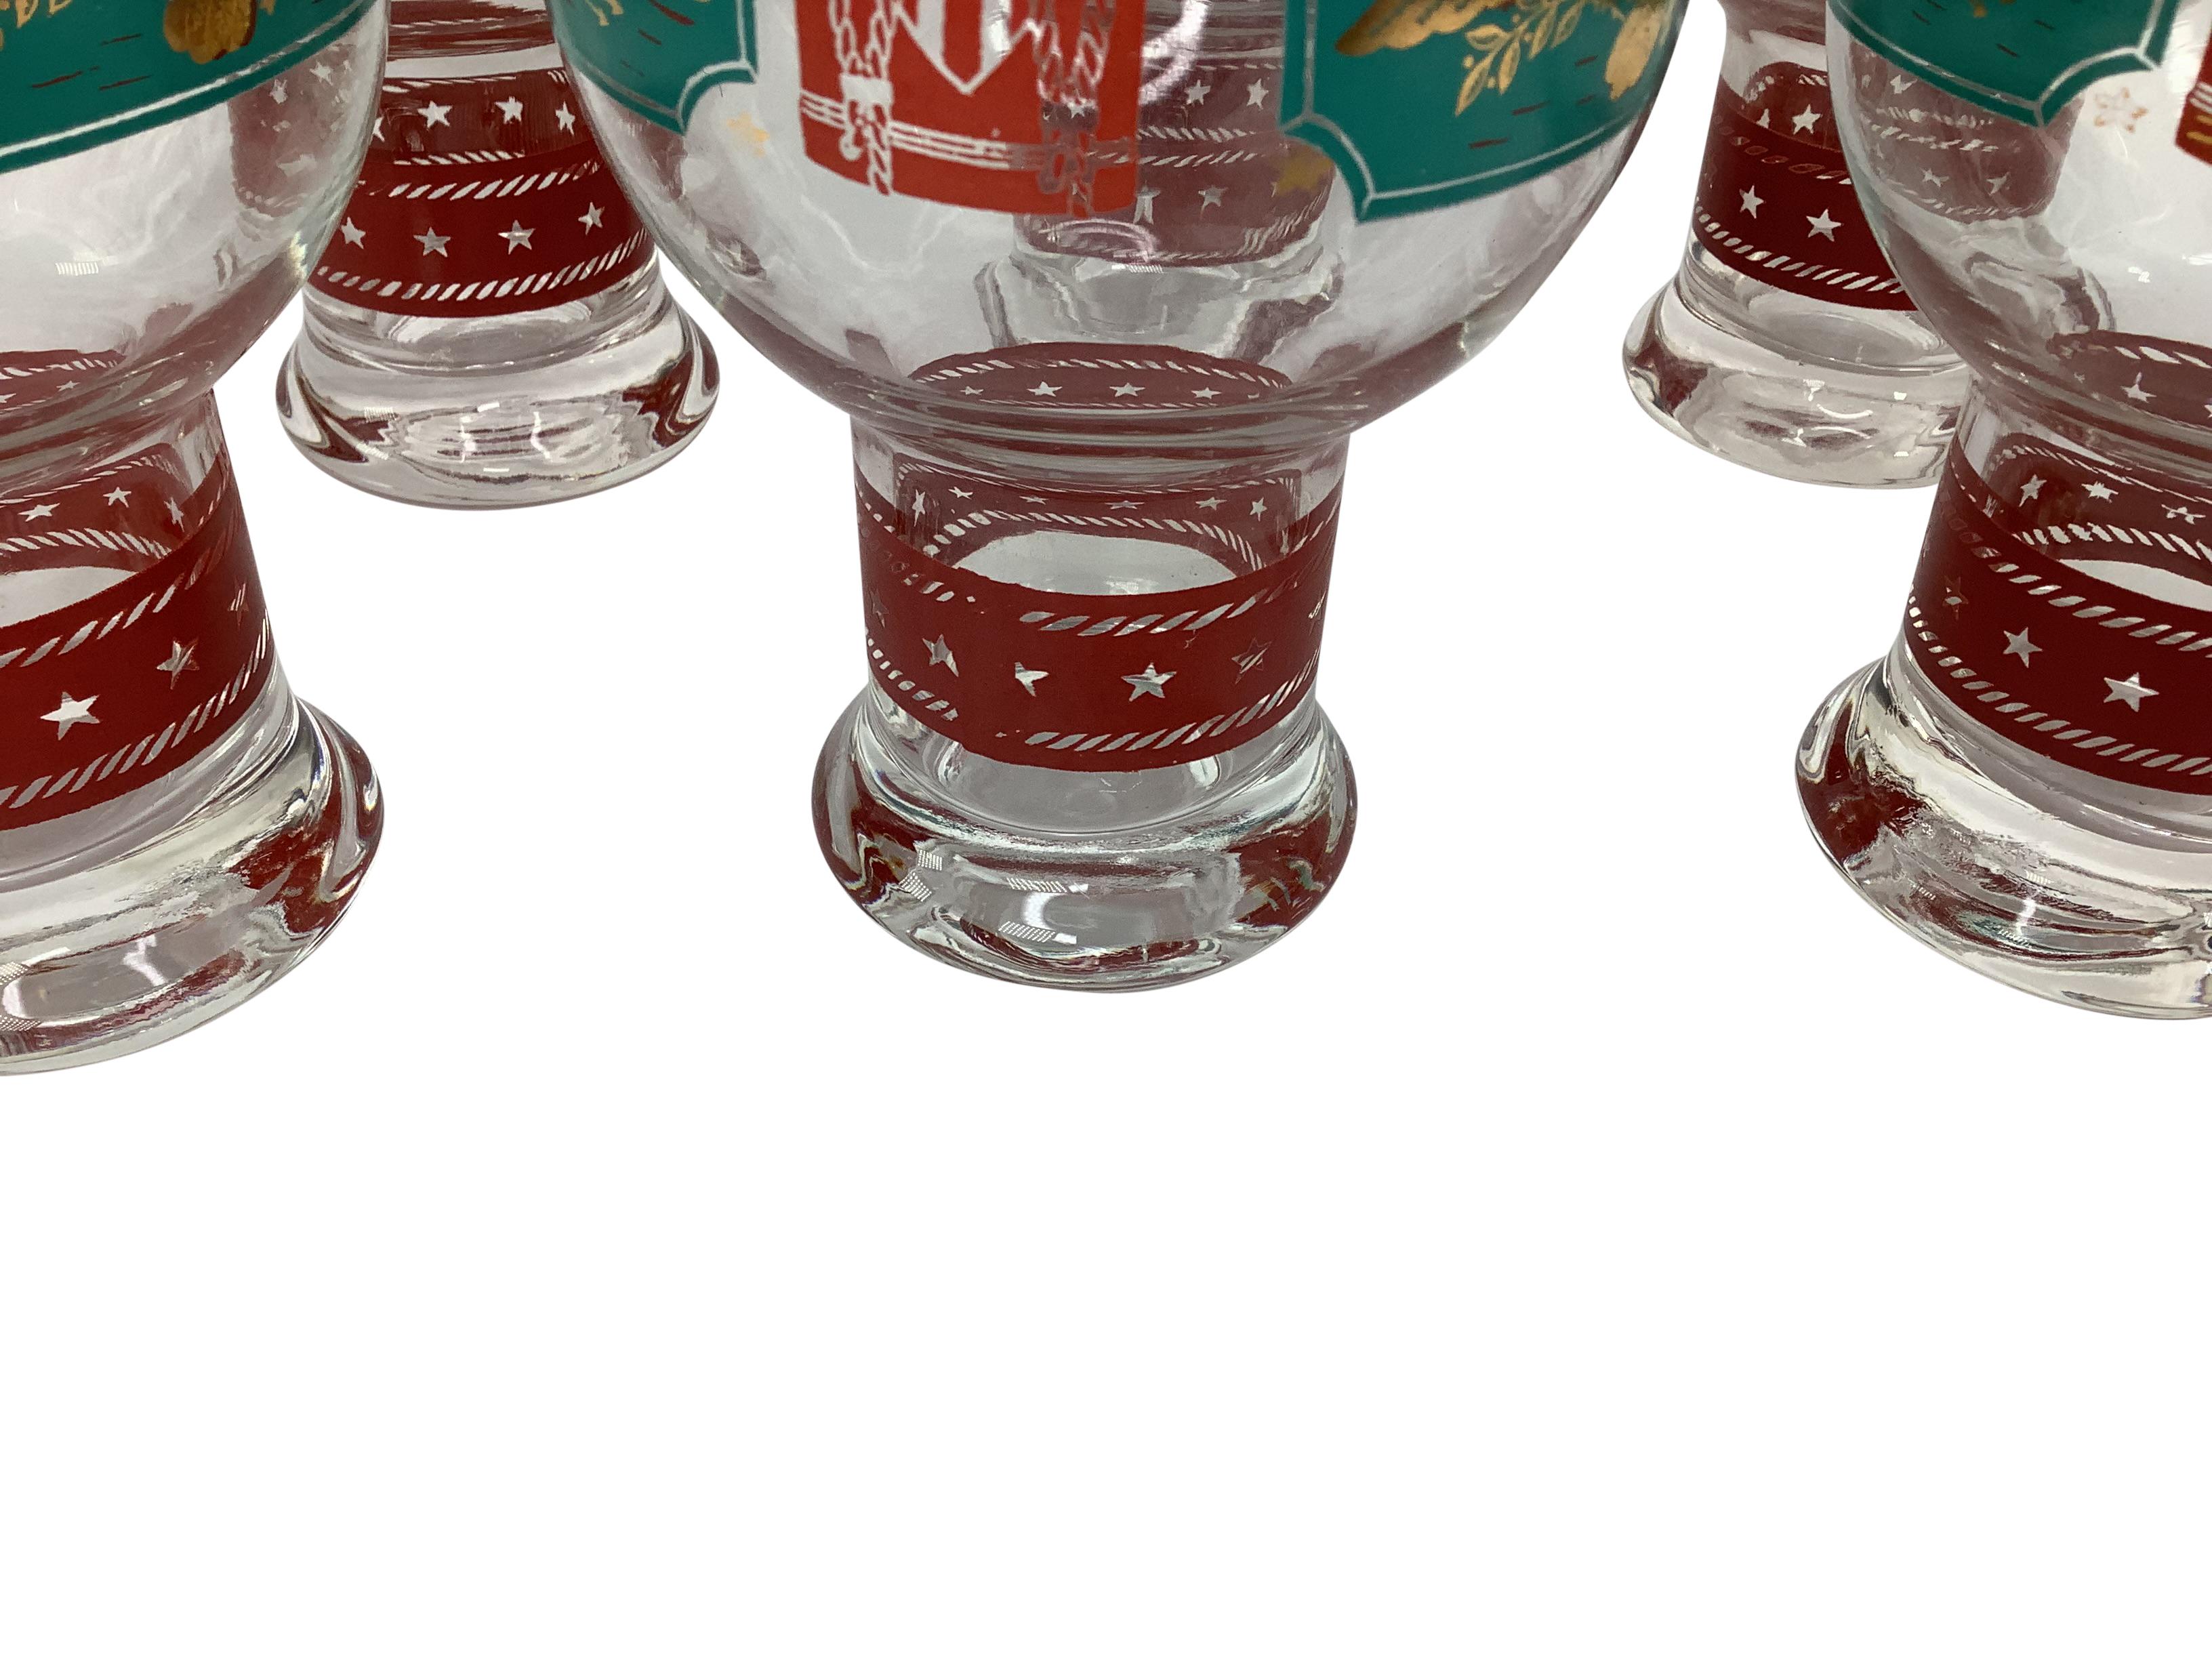 Set of 6 Vintage Cera Patriotic Drum Beer Glasses in Teal & Red Enamel  In Good Condition For Sale In Chapel Hill, NC